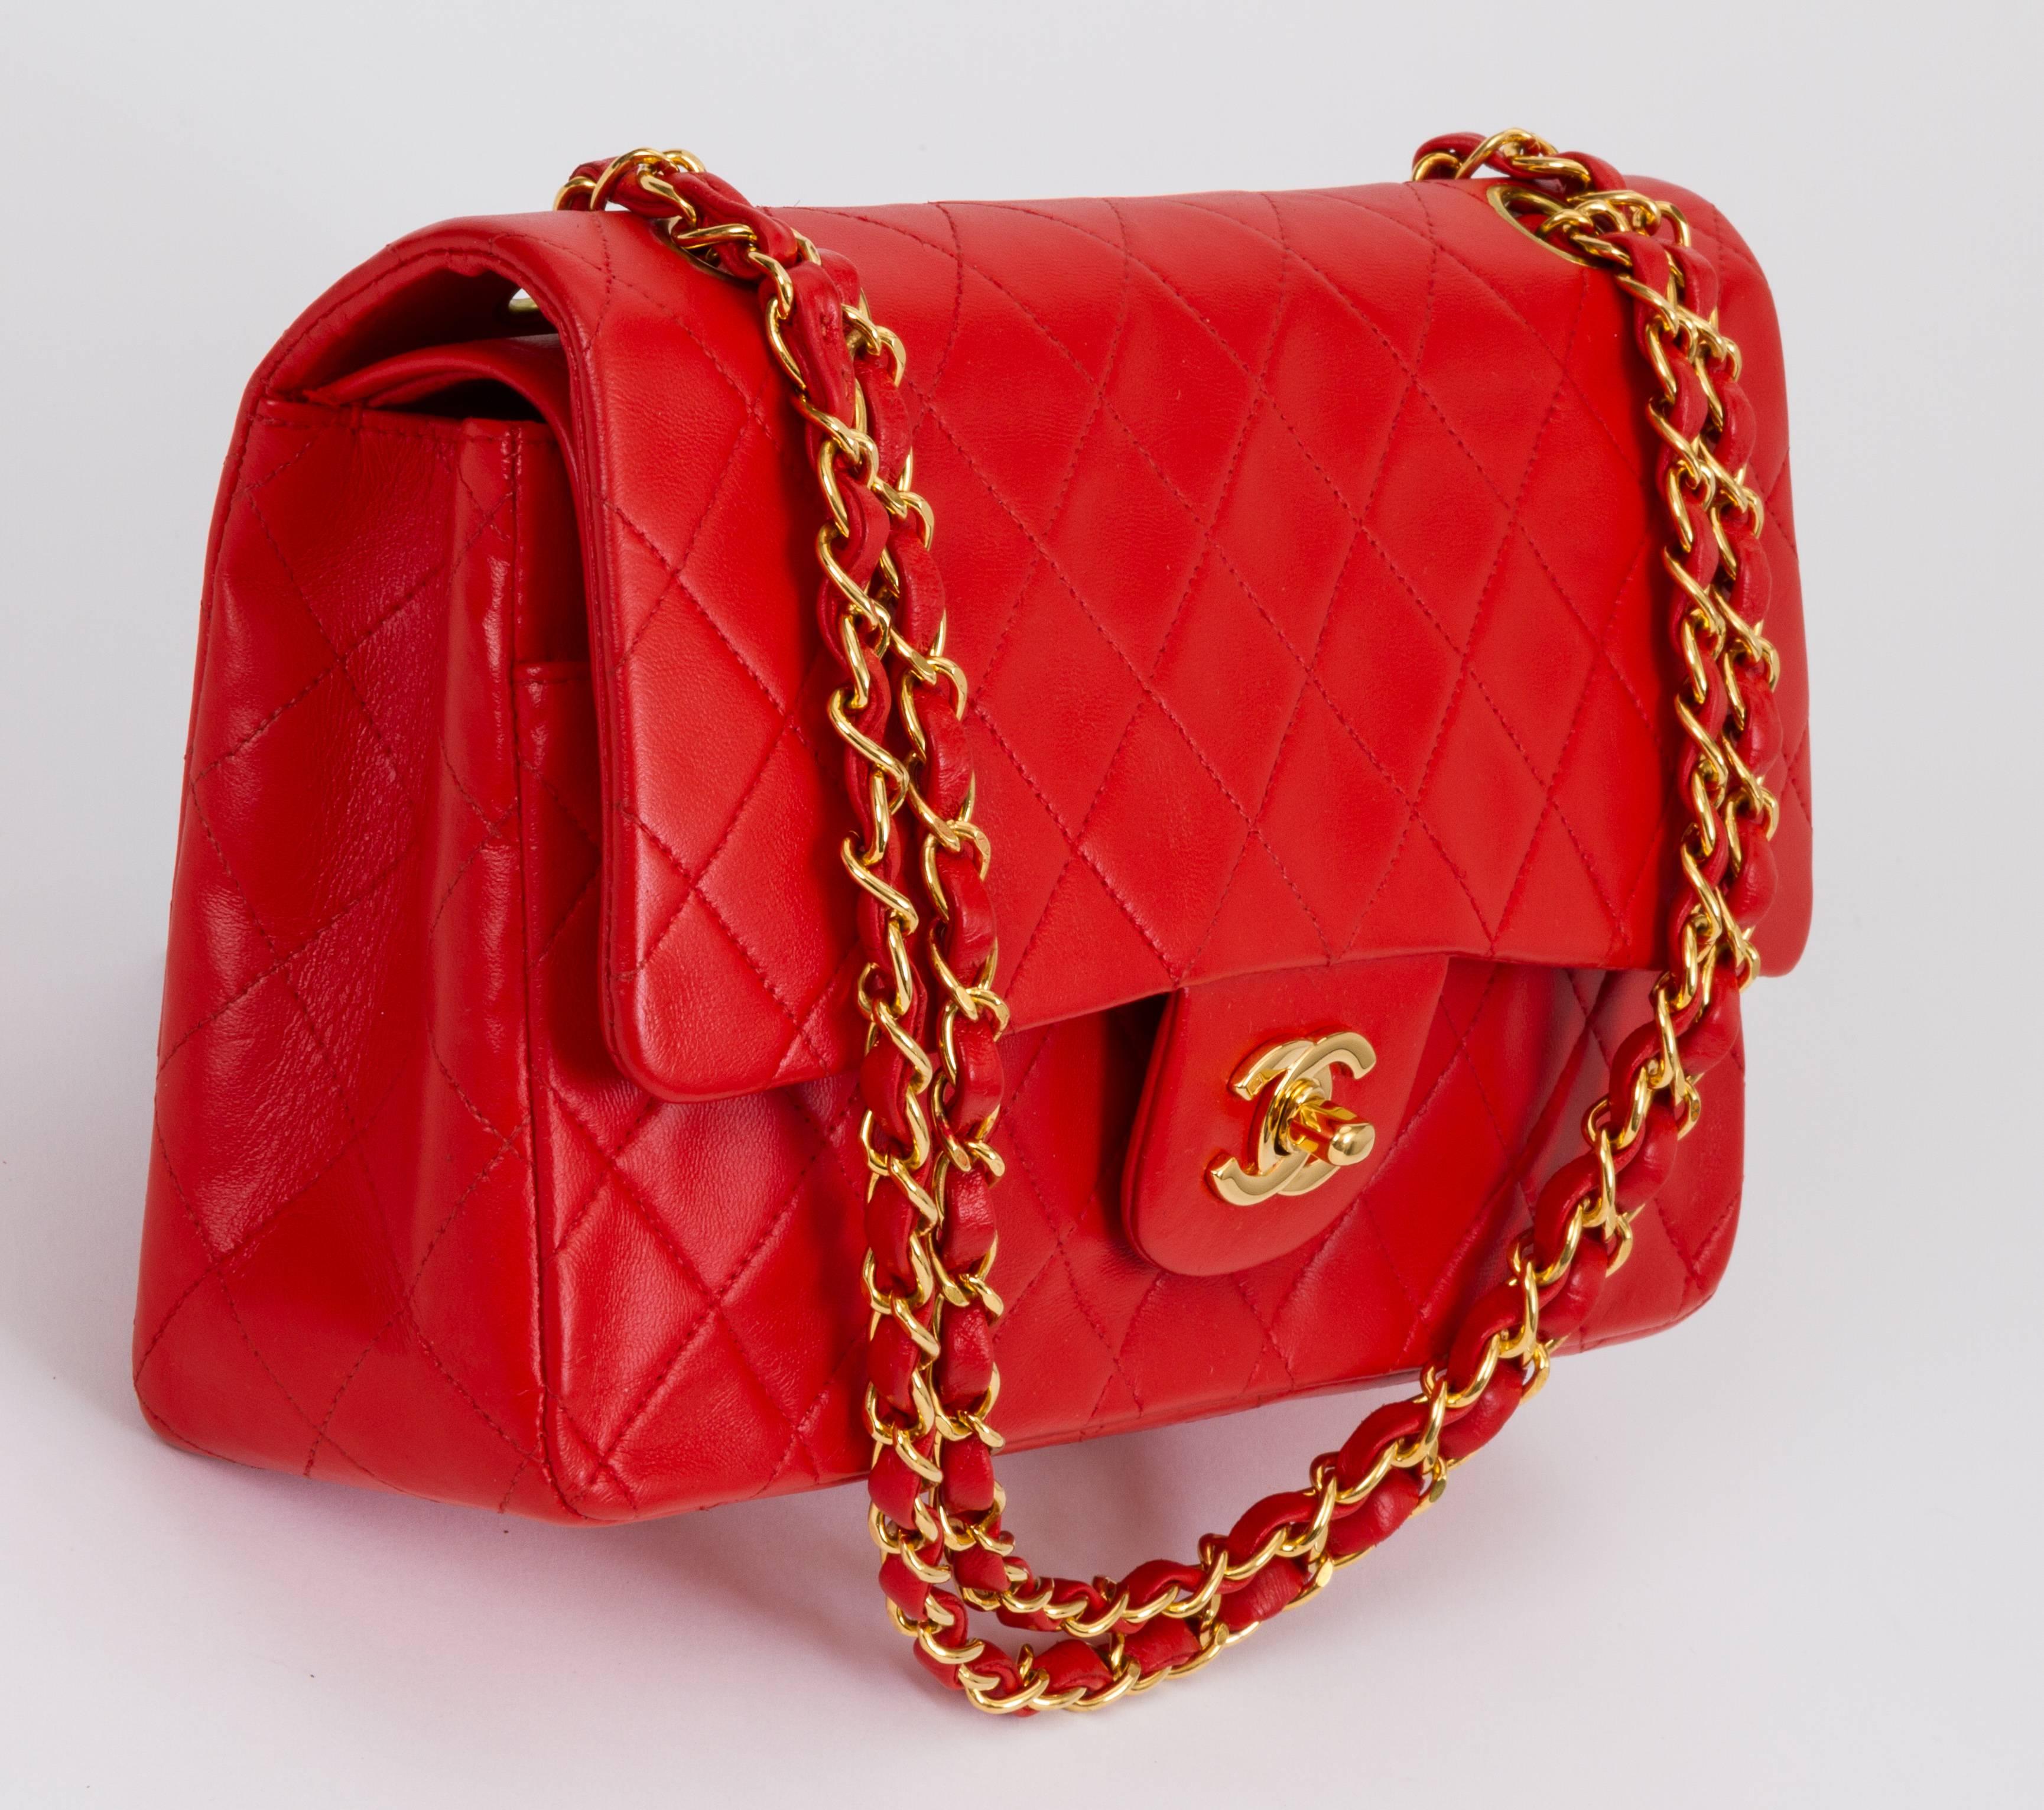 Chanel coral red 10